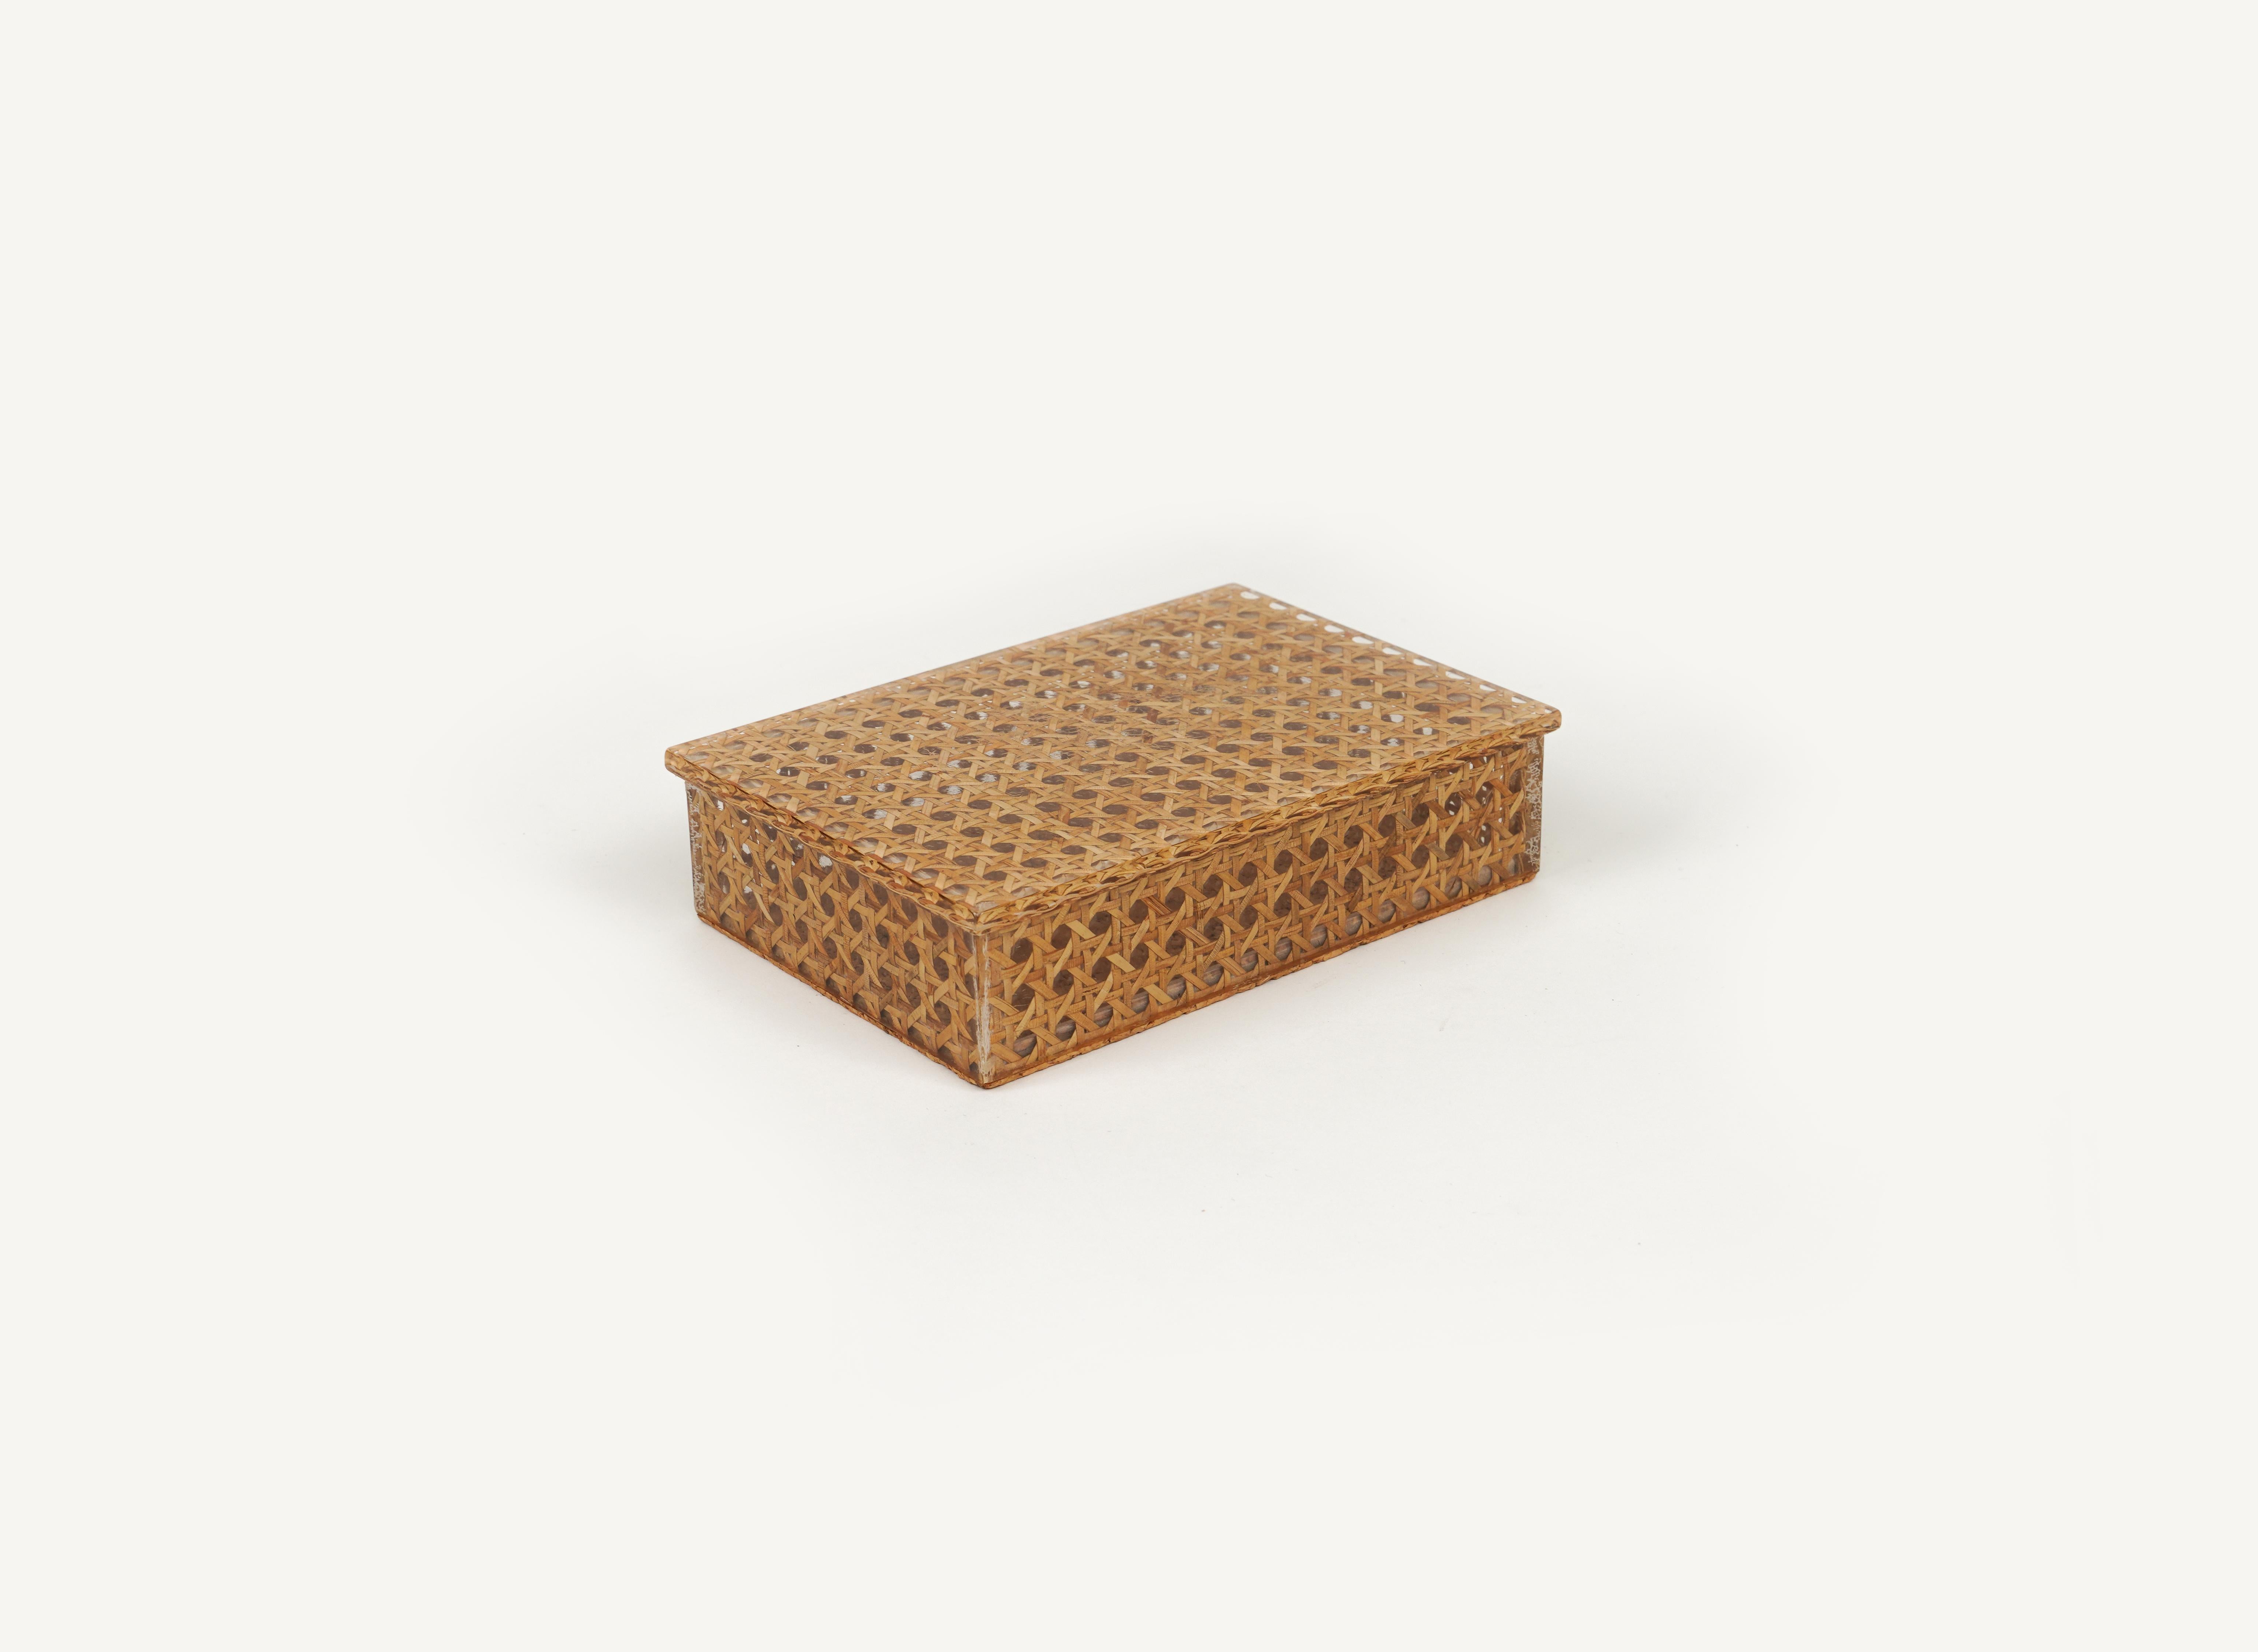 Midcentury amazing rectangular decorative jewelry box in lucite, rattan and cork in the style of Christian Dior Home.

Made in Italy in the 1970s.

Perfect desk object or gift idea.